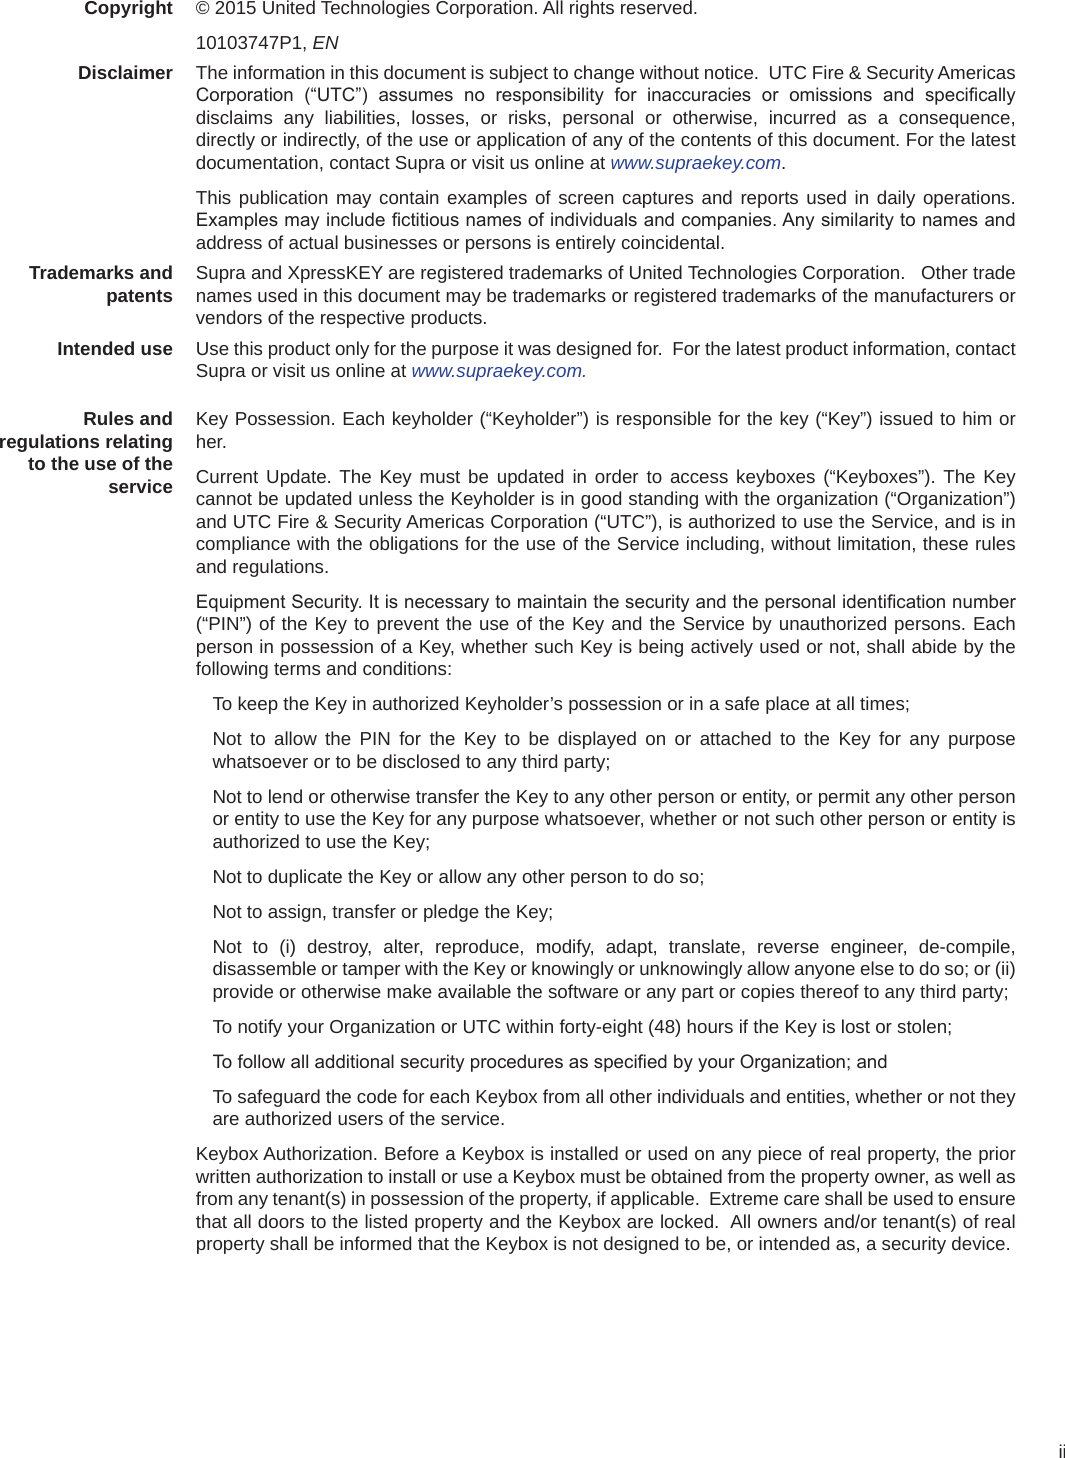 iiCopyright © 2015 United Technologies Corporation. All rights reserved.10103747P1, ENDisclaimer The information in this document is subject to change without notice.  UTC Fire &amp; Security Americas Corporation  (“UTC”)  assumes  no  responsibility  for  inaccuracies  or  omissions  and  specically disclaims any liabilities, losses, or risks, personal or otherwise, incurred as a consequence, directly or indirectly, of the use or application of any of the contents of this document. For the latest documentation, contact Supra or visit us online at www.supraekey.com.This publication may contain examples of screen captures and reports used in daily operations. Examples may include ctitious names of individuals and companies. Any similarity to names and address of actual businesses or persons is entirely coincidental.Trademarks and patents Supra and XpressKEY are registered trademarks of United Technologies Corporation.   Other trade names used in this document may be trademarks or registered trademarks of the manufacturers or vendors of the respective products.Intended use Use this product only for the purpose it was designed for.  For the latest product information, contact Supra or visit us online at www.supraekey.com.Rules and regulations relating to the use of the serviceKey Possession. Each keyholder (“Keyholder”) is responsible for the key (“Key”) issued to him or her.Current Update. The Key must be updated in order to access keyboxes (“Keyboxes”). The Key cannot be updated unless the Keyholder is in good standing with the organization (“Organization”) and UTC Fire &amp; Security Americas Corporation (“UTC”), is authorized to use the Service, and is in compliance with the obligations for the use of the Service including, without limitation, these rules and regulations.Equipment Security. It is necessary to maintain the security and the personal identication number (“PIN”) of the Key to prevent the use of the Key and the Service by unauthorized persons. Each person in possession of a Key, whether such Key is being actively used or not, shall abide by the following terms and conditions:To keep the Key in authorized Keyholder’s possession or in a safe place at all times;Not to allow the PIN for the Key to be displayed on or attached to the Key for any purpose whatsoever or to be disclosed to any third party;Not to lend or otherwise transfer the Key to any other person or entity, or permit any other person or entity to use the Key for any purpose whatsoever, whether or not such other person or entity is authorized to use the Key;Not to duplicate the Key or allow any other person to do so;Not to assign, transfer or pledge the Key;Not to (i) destroy, alter, reproduce, modify, adapt, translate, reverse engineer, de-compile, disassemble or tamper with the Key or knowingly or unknowingly allow anyone else to do so; or (ii) provide or otherwise make available the software or any part or copies thereof to any third party;To notify your Organization or UTC within forty-eight (48) hours if the Key is lost or stolen;To follow all additional security procedures as specied by your Organization; and To safeguard the code for each Keybox from all other individuals and entities, whether or not they are authorized users of the service.Keybox Authorization. Before a Keybox is installed or used on any piece of real property, the prior written authorization to install or use a Keybox must be obtained from the property owner, as well as from any tenant(s) in possession of the property, if applicable.  Extreme care shall be used to ensure that all doors to the listed property and the Keybox are locked.  All owners and/or tenant(s) of real property shall be informed that the Keybox is not designed to be, or intended as, a security device.